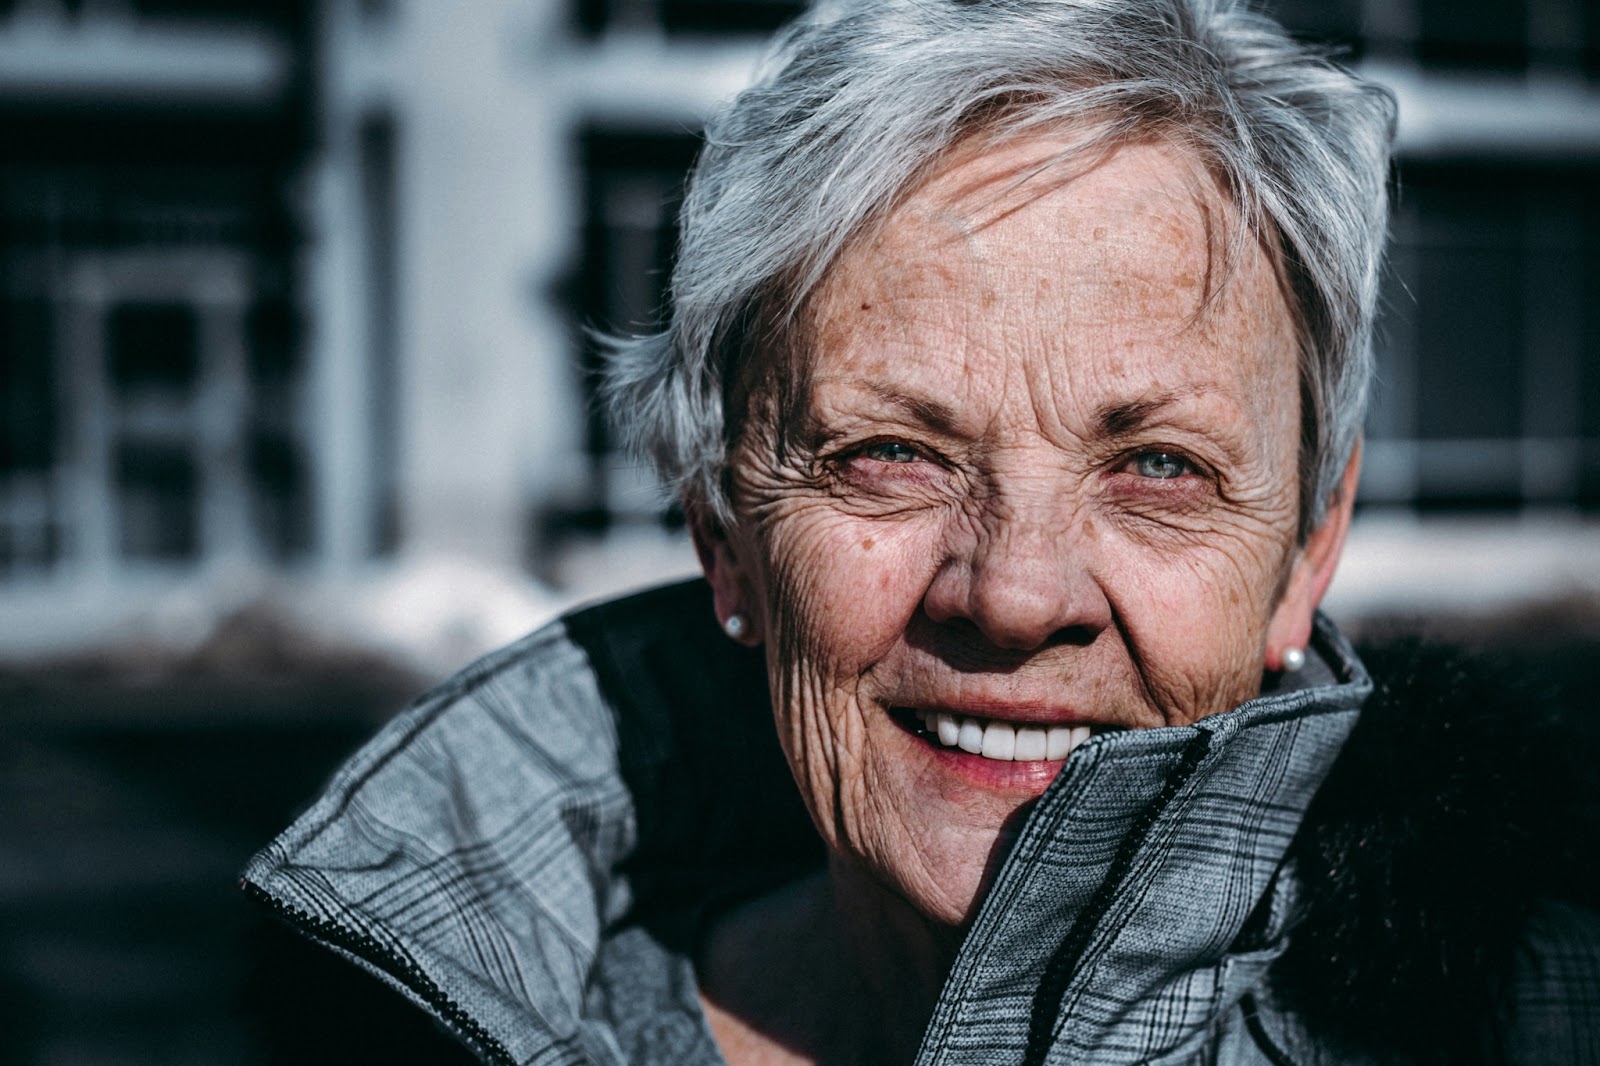 An older woman in a coat smiling